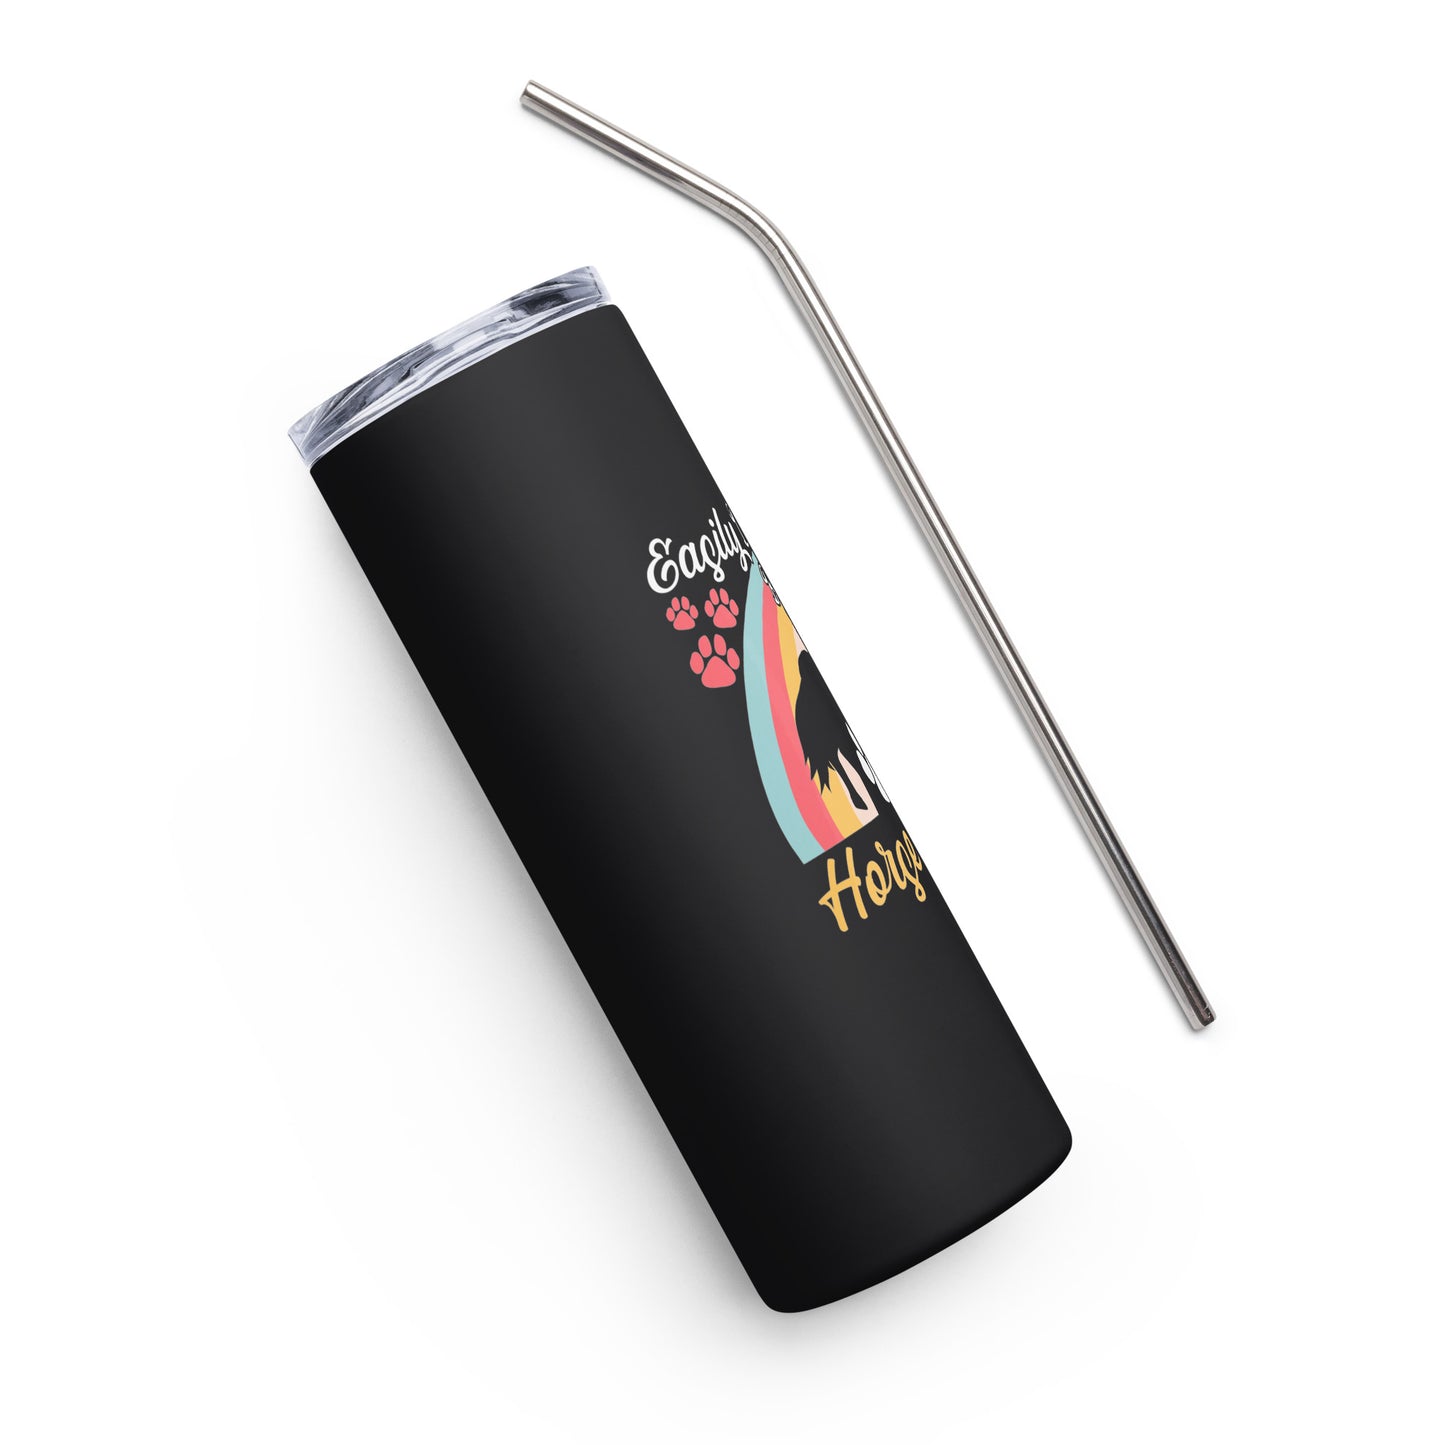 Easily Distracted by Horse and Dogs Stainless steel tumbler